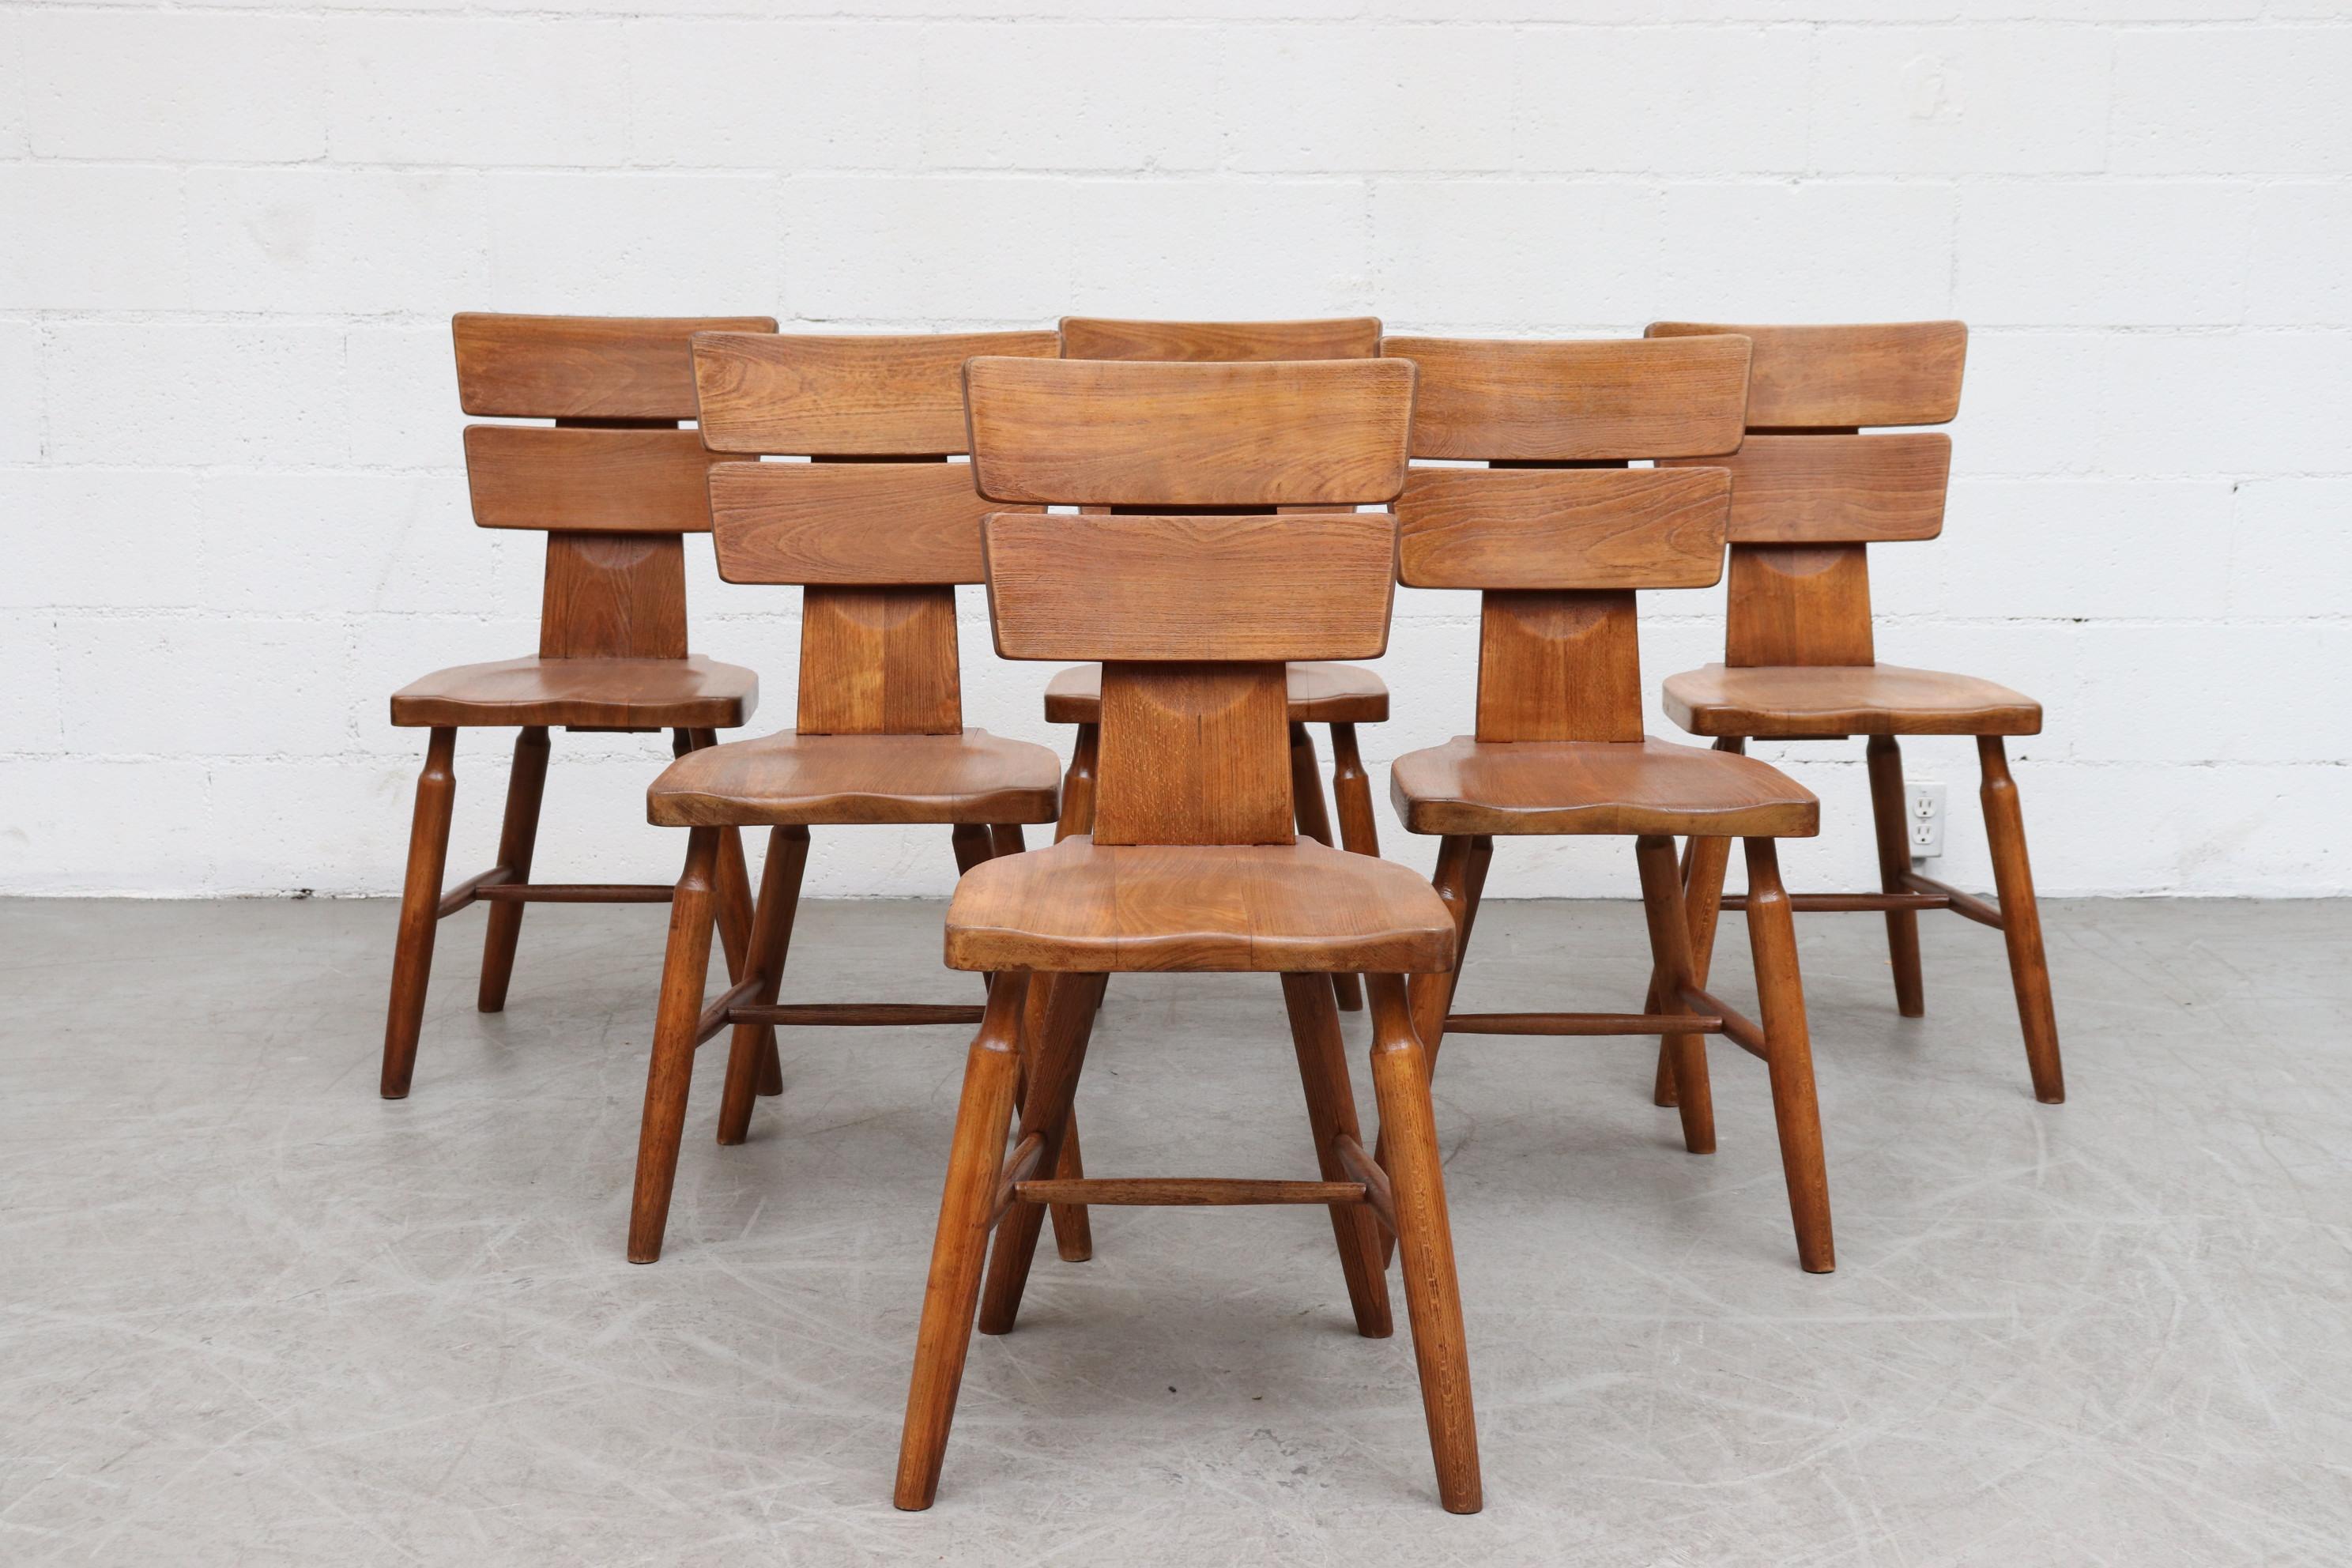 Set of 6 Brutalist dining chairs with horizontal linear detail. Lightly refinished. In original condition with some visible signs of wear consistent with age and use. Set price.